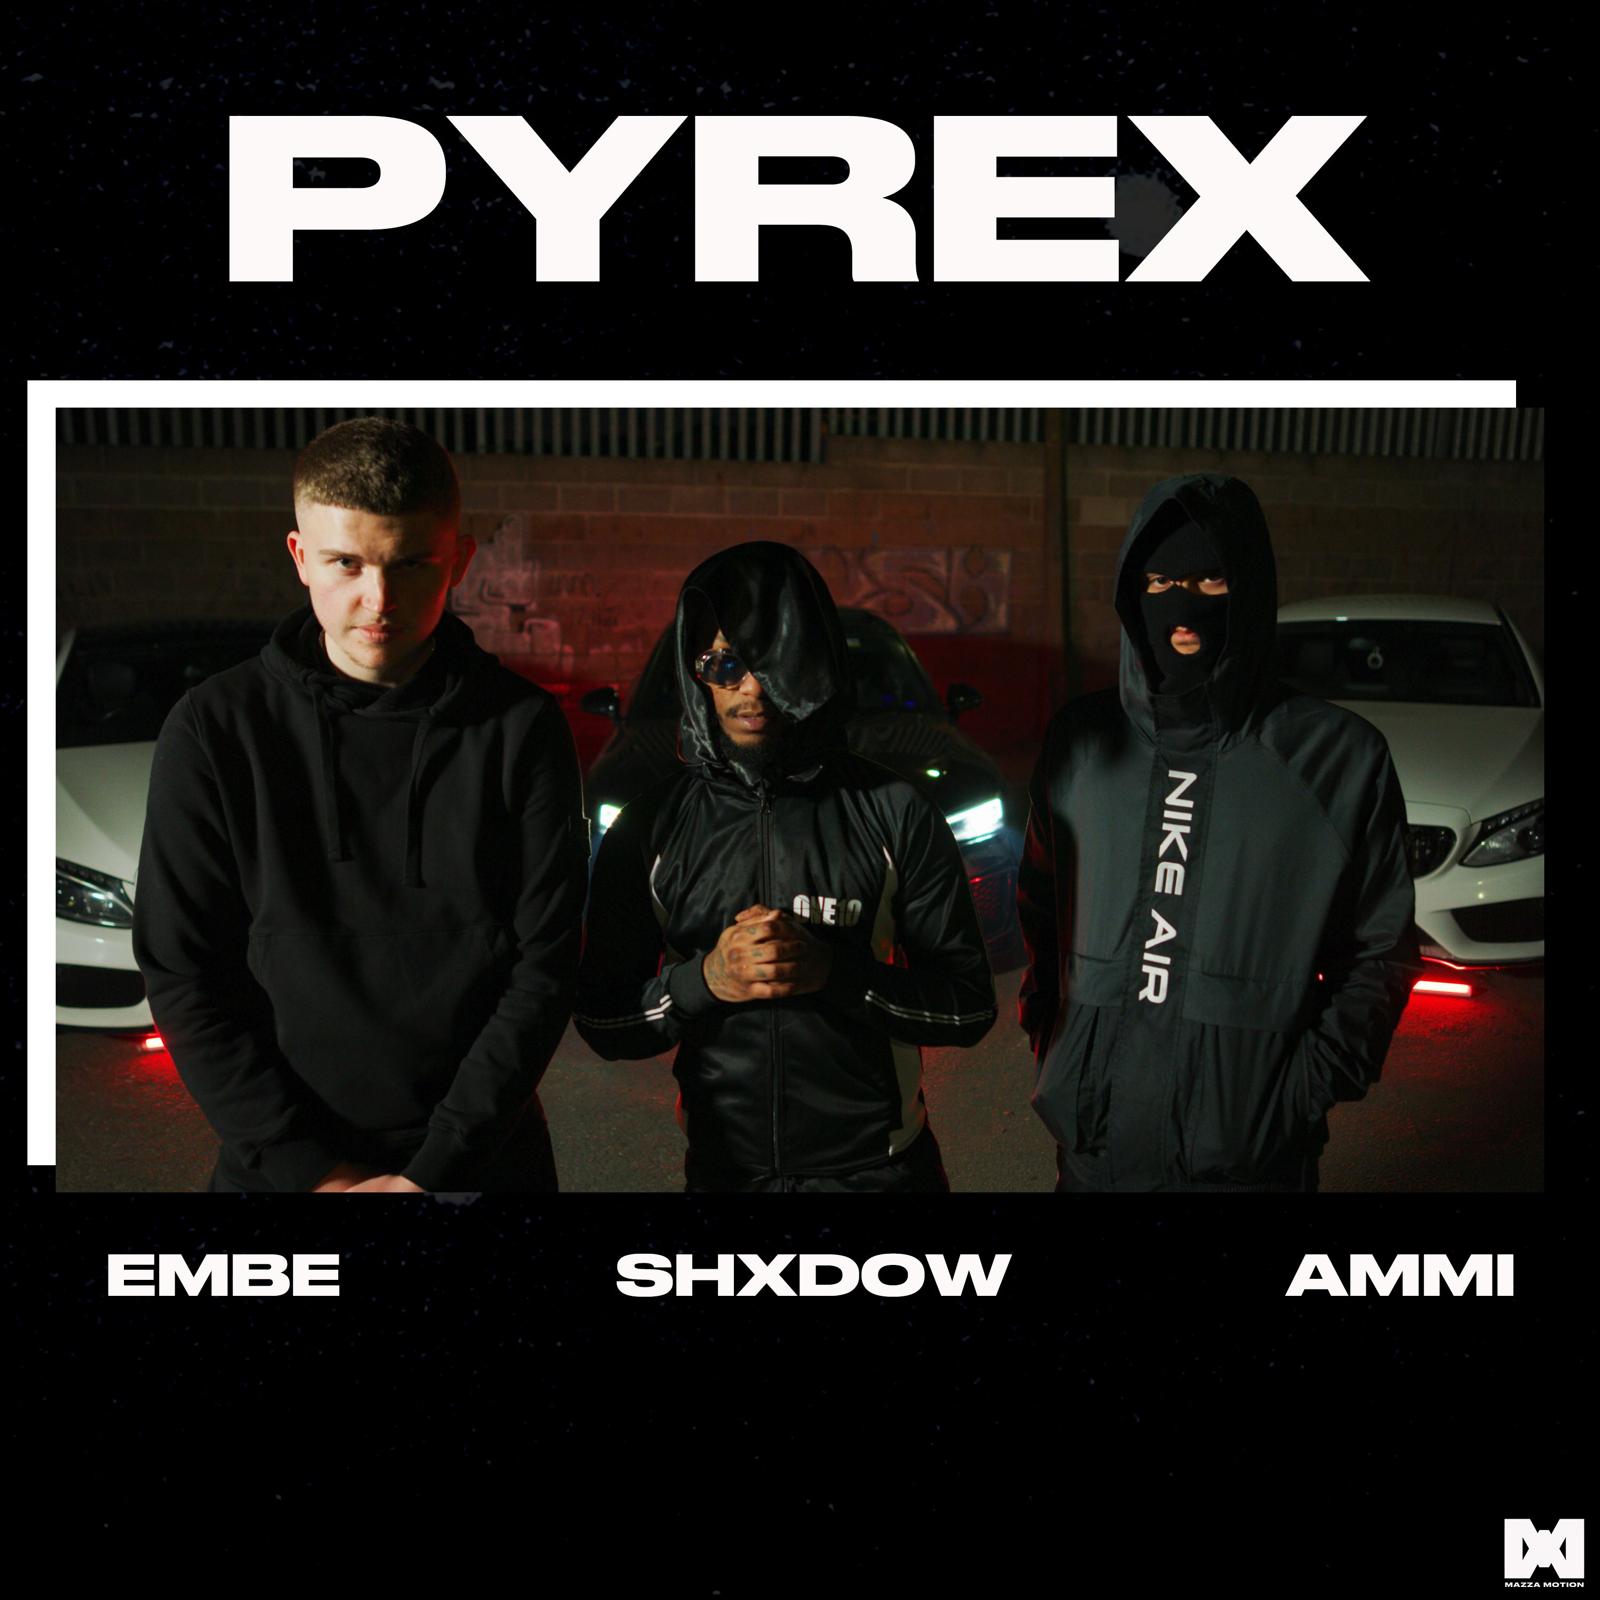 Embe joins forces with Shxdow & Ammi to deliver ‘Pyrex’ music video Photograph